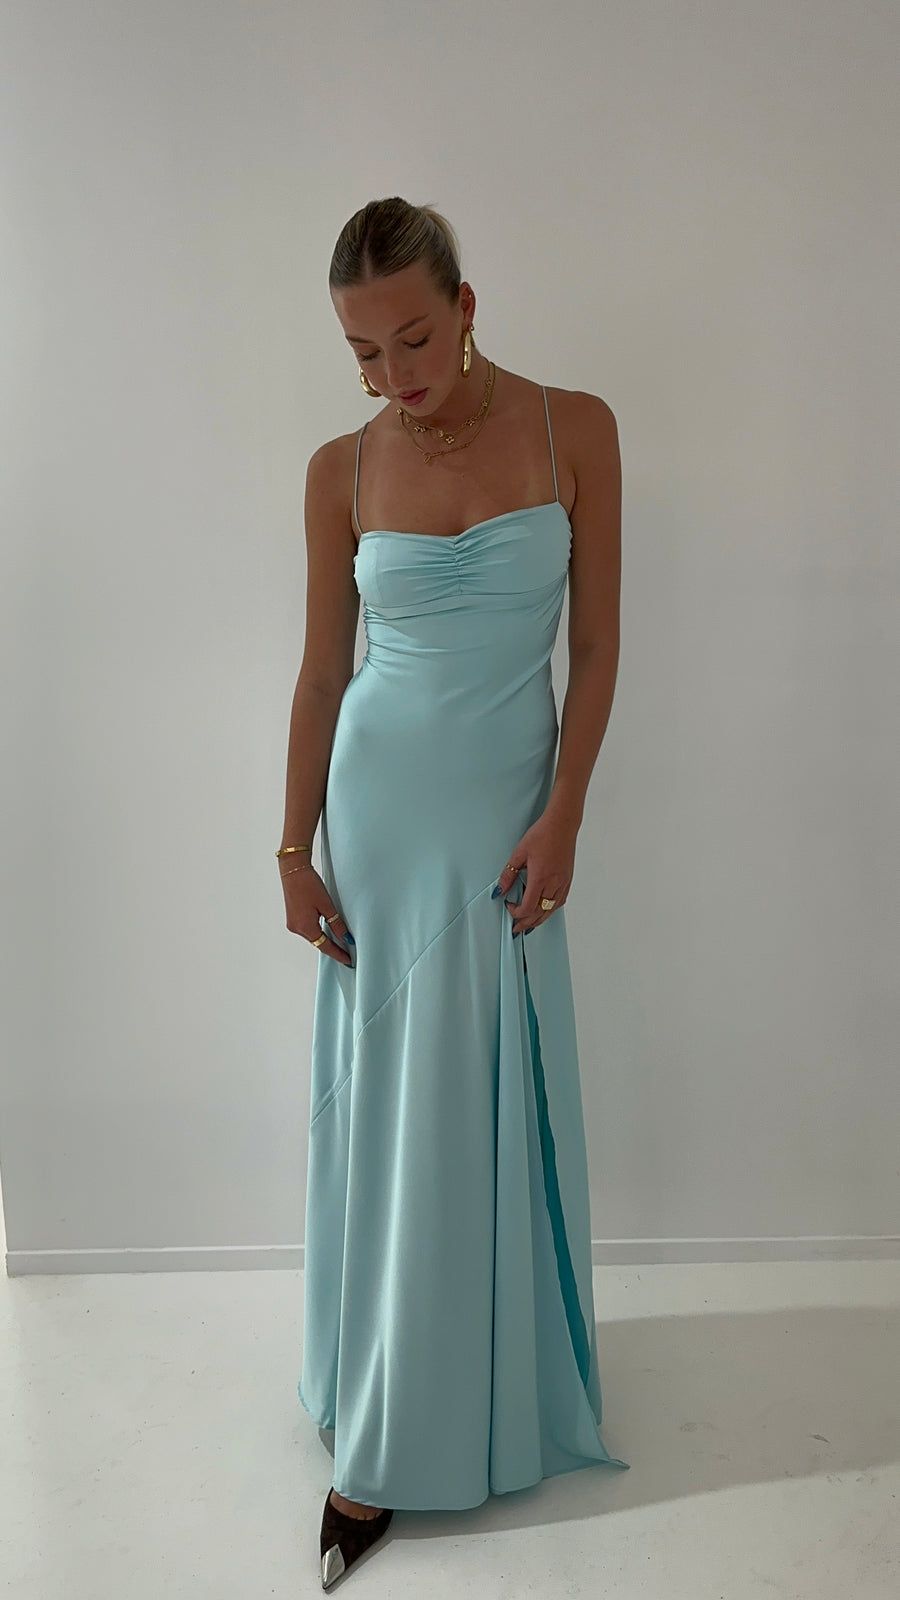 Stunning Blue Formal Dresses Perfect for
Any Occasion